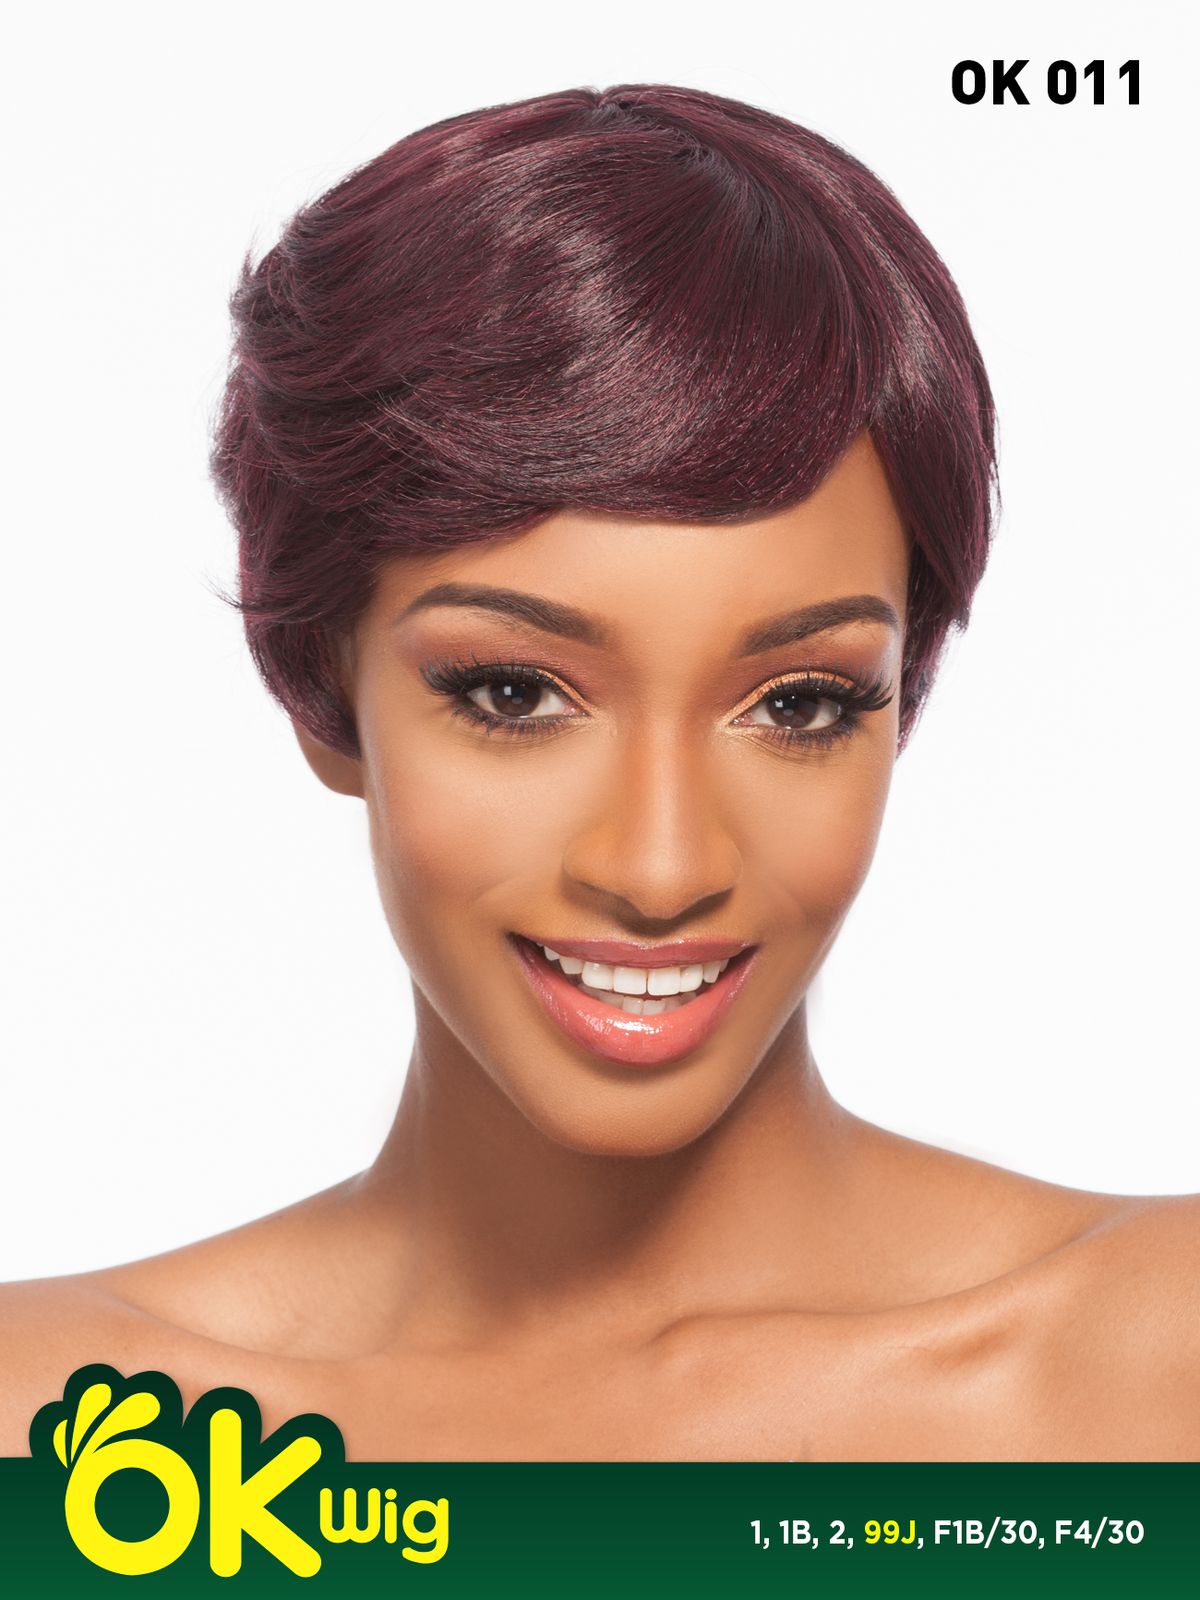 Hair Topic Soft & Natural Synthetic Wig OK 011